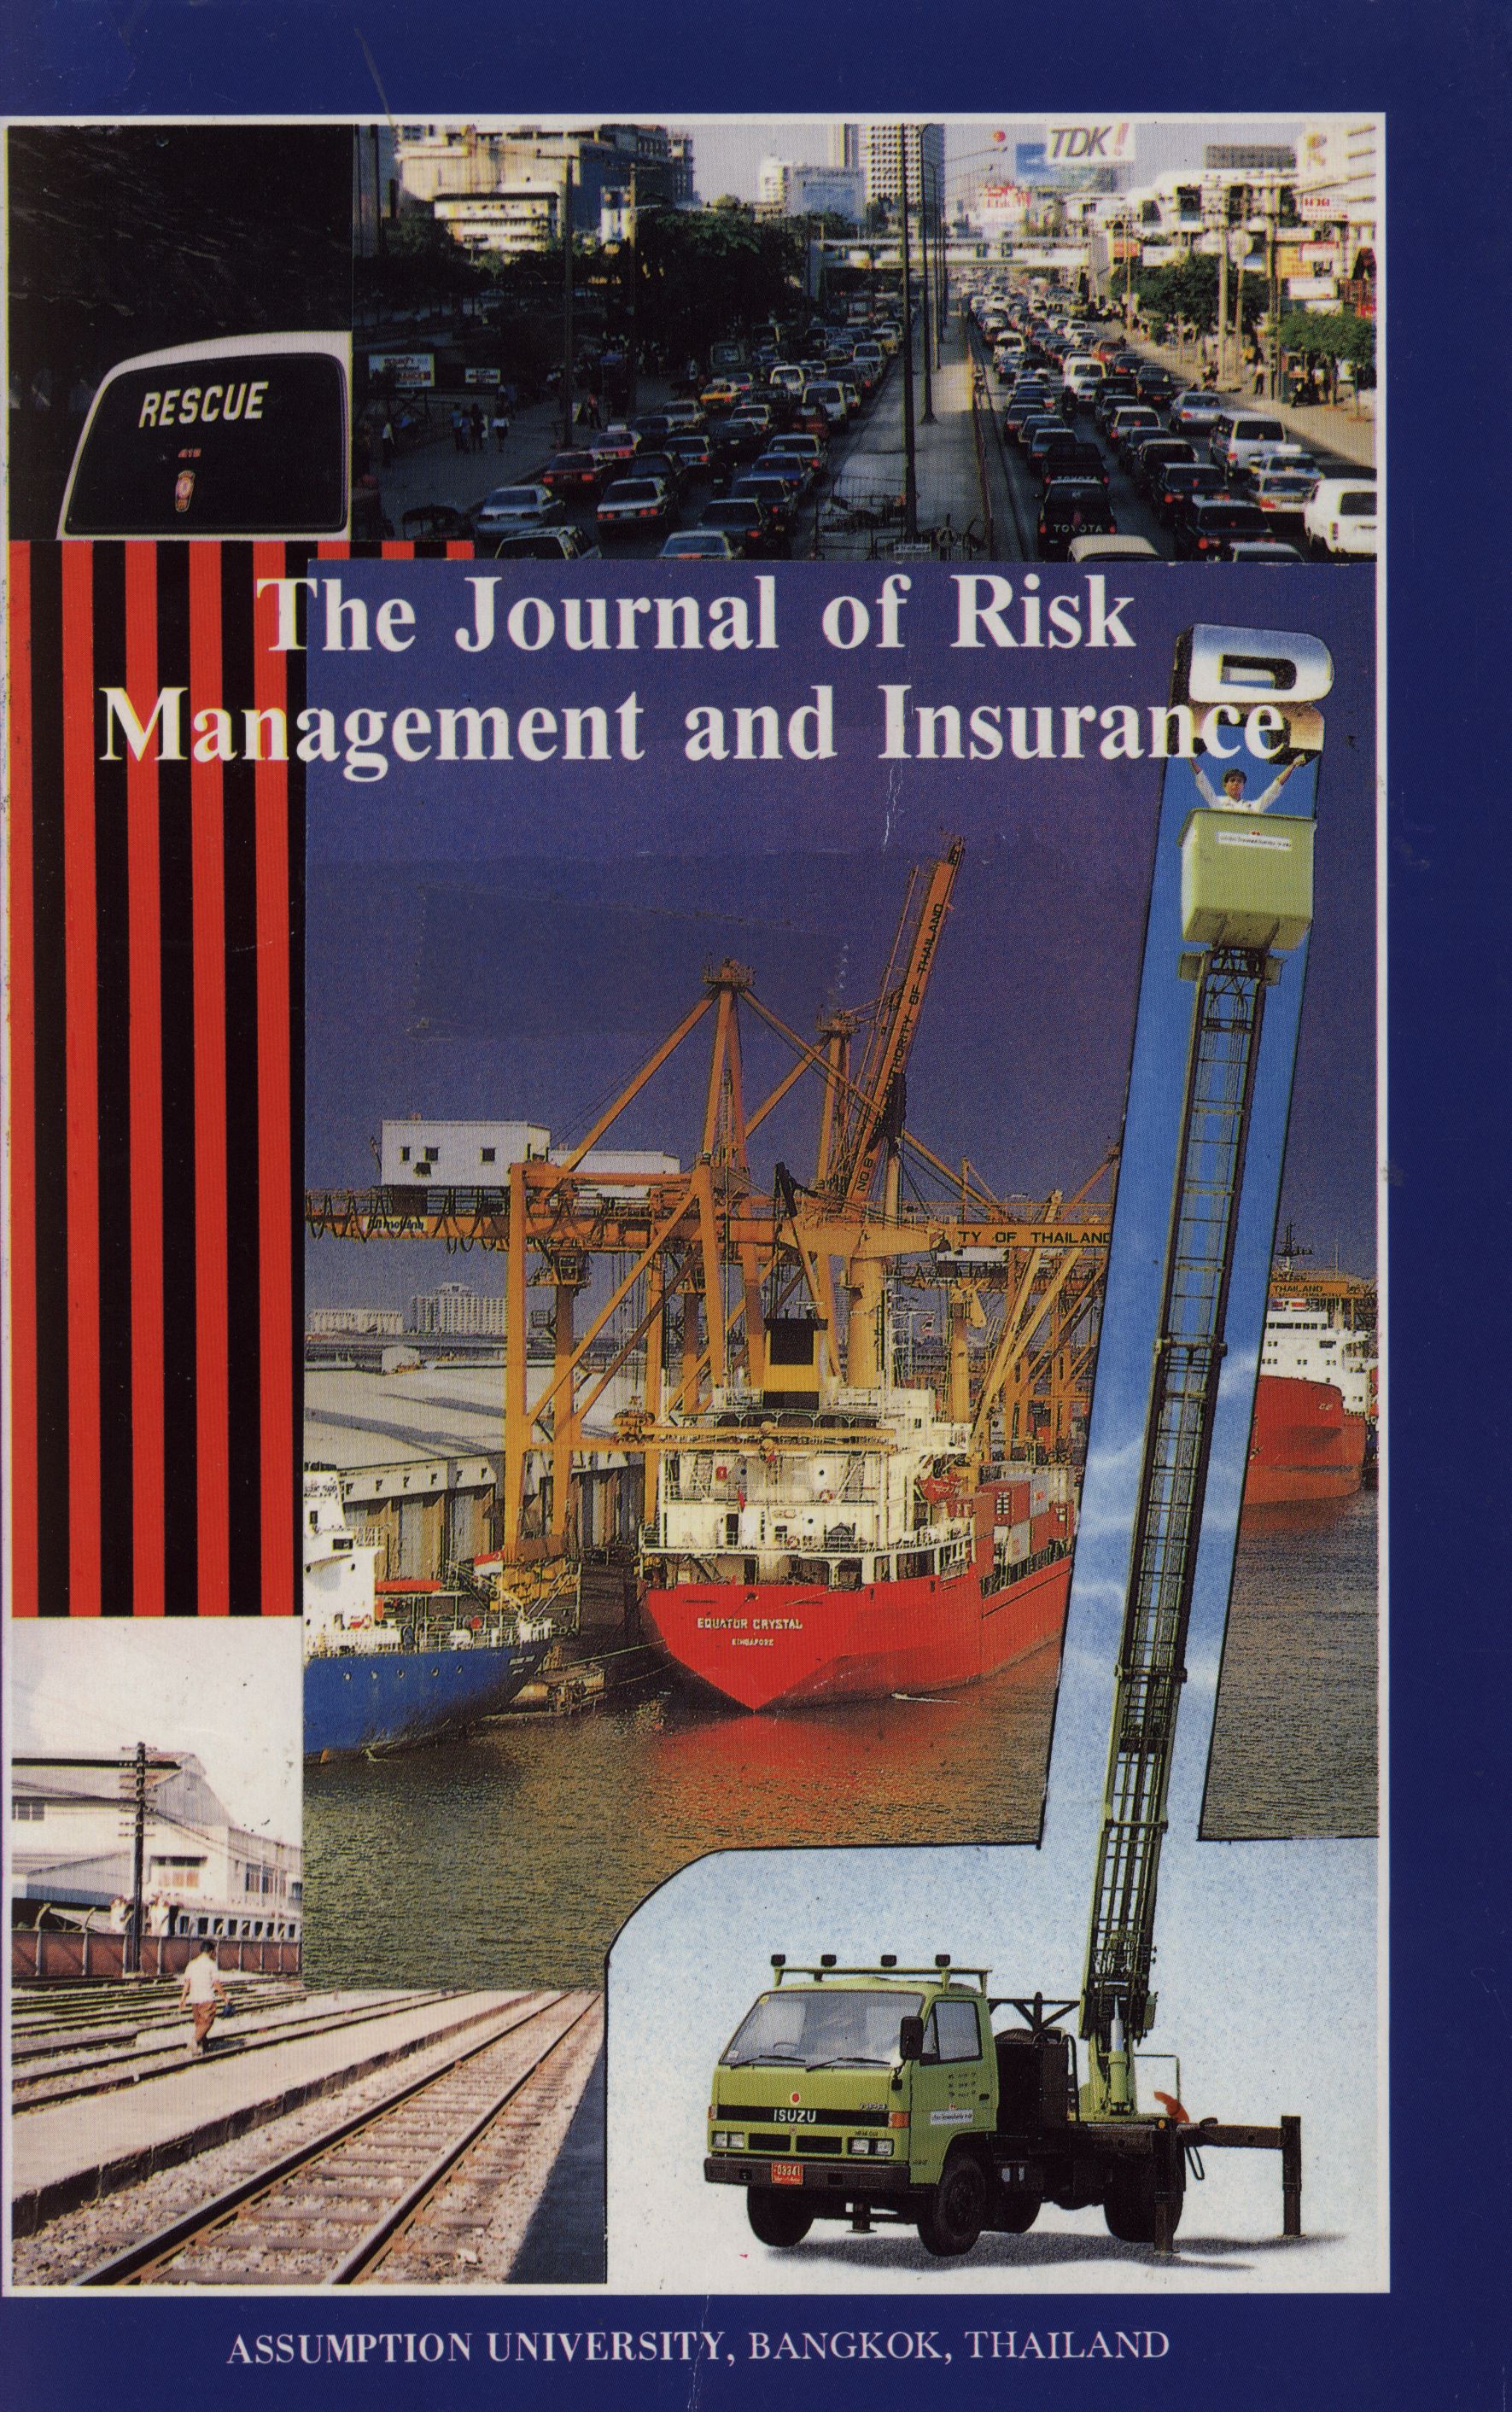 					View Vol. 1 No. 1 (1995): The Journal of Risk Management and Insurance
				